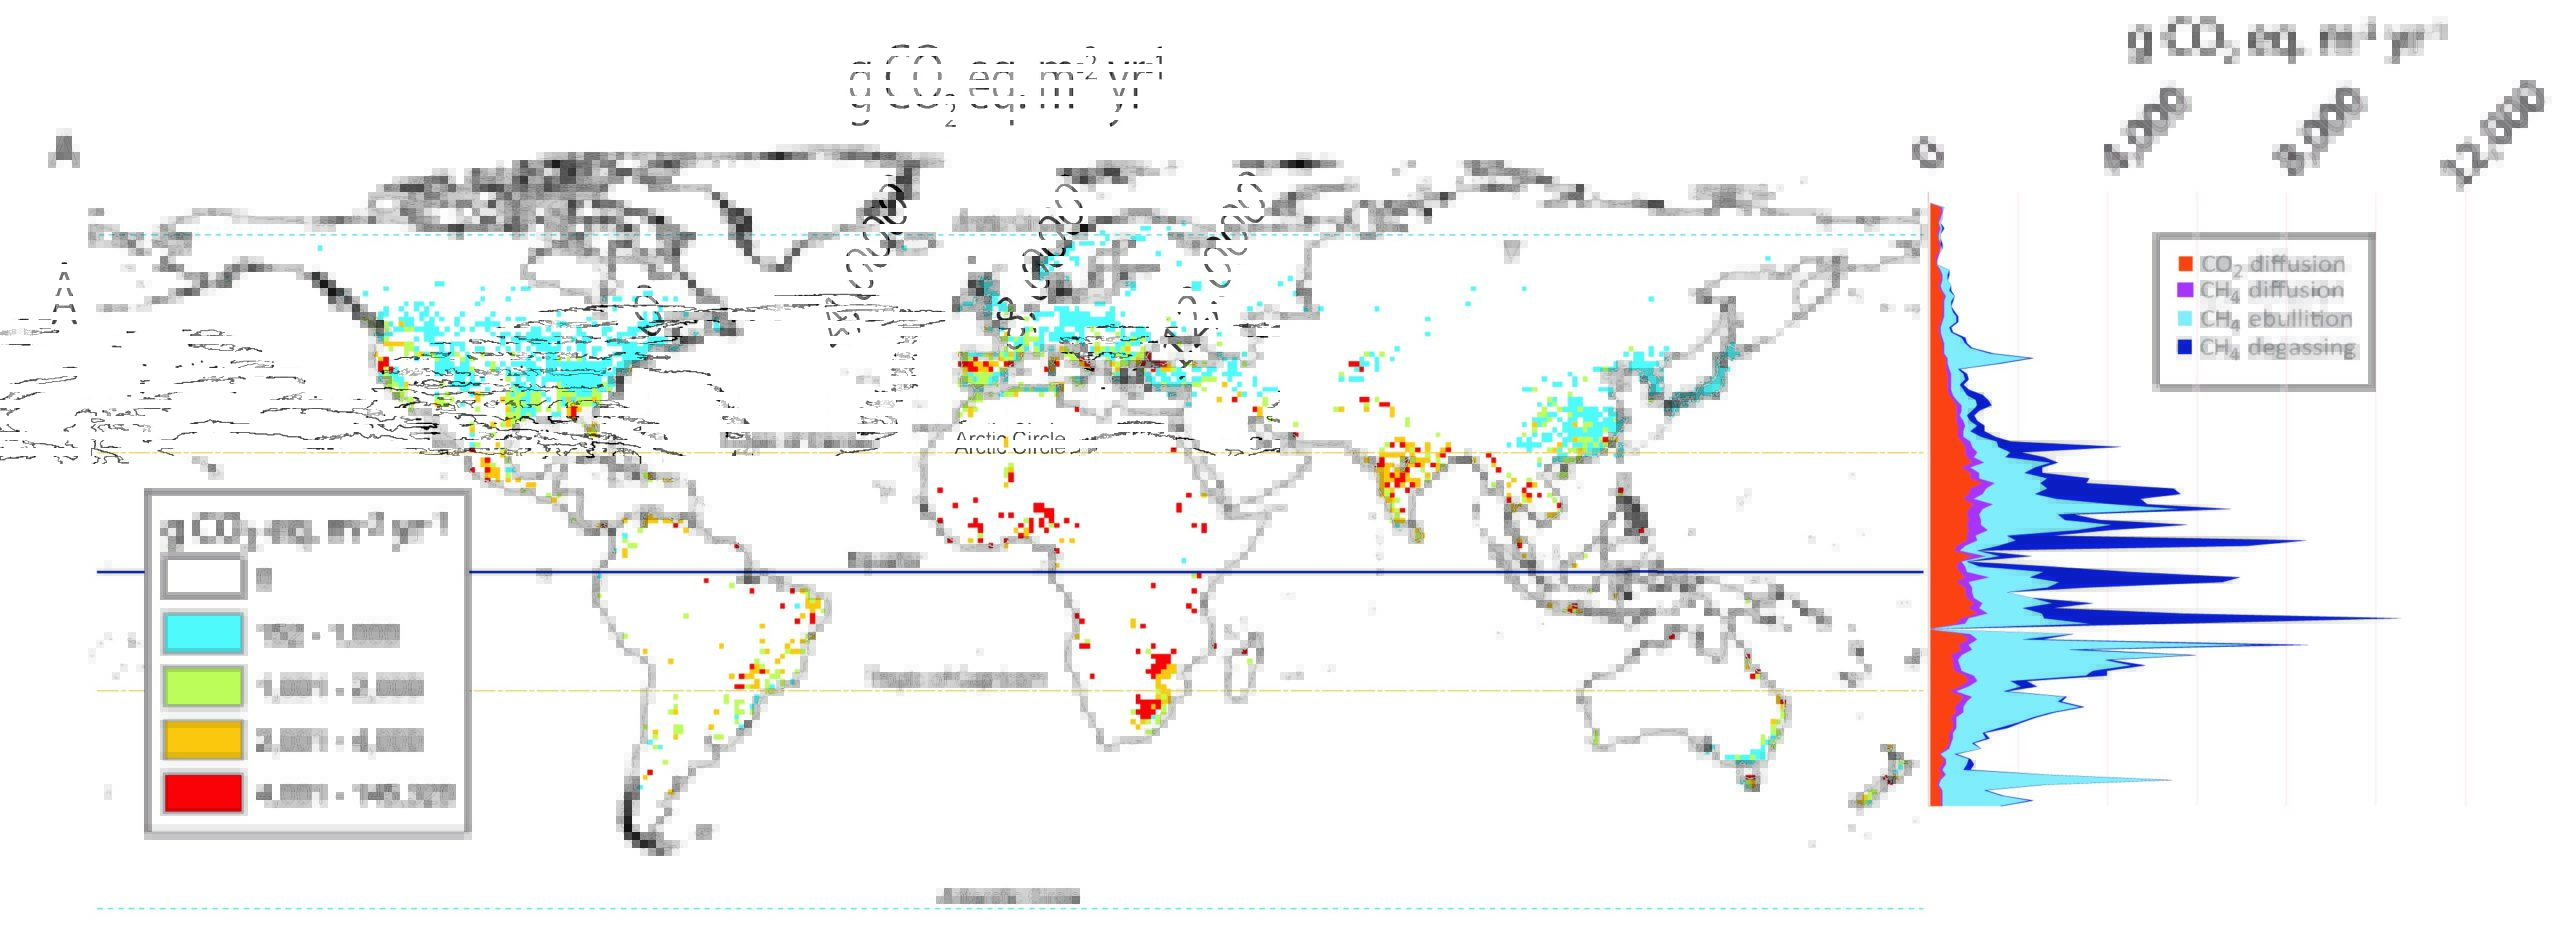 On the left, a world map shows locations of reservoirs and average rate of greenhouse gas emissions (carbon dioxide equivalent per meter squared per year). On the right, distribution of total greenhouse gas mass emitted by latitude, broken out by pathway.